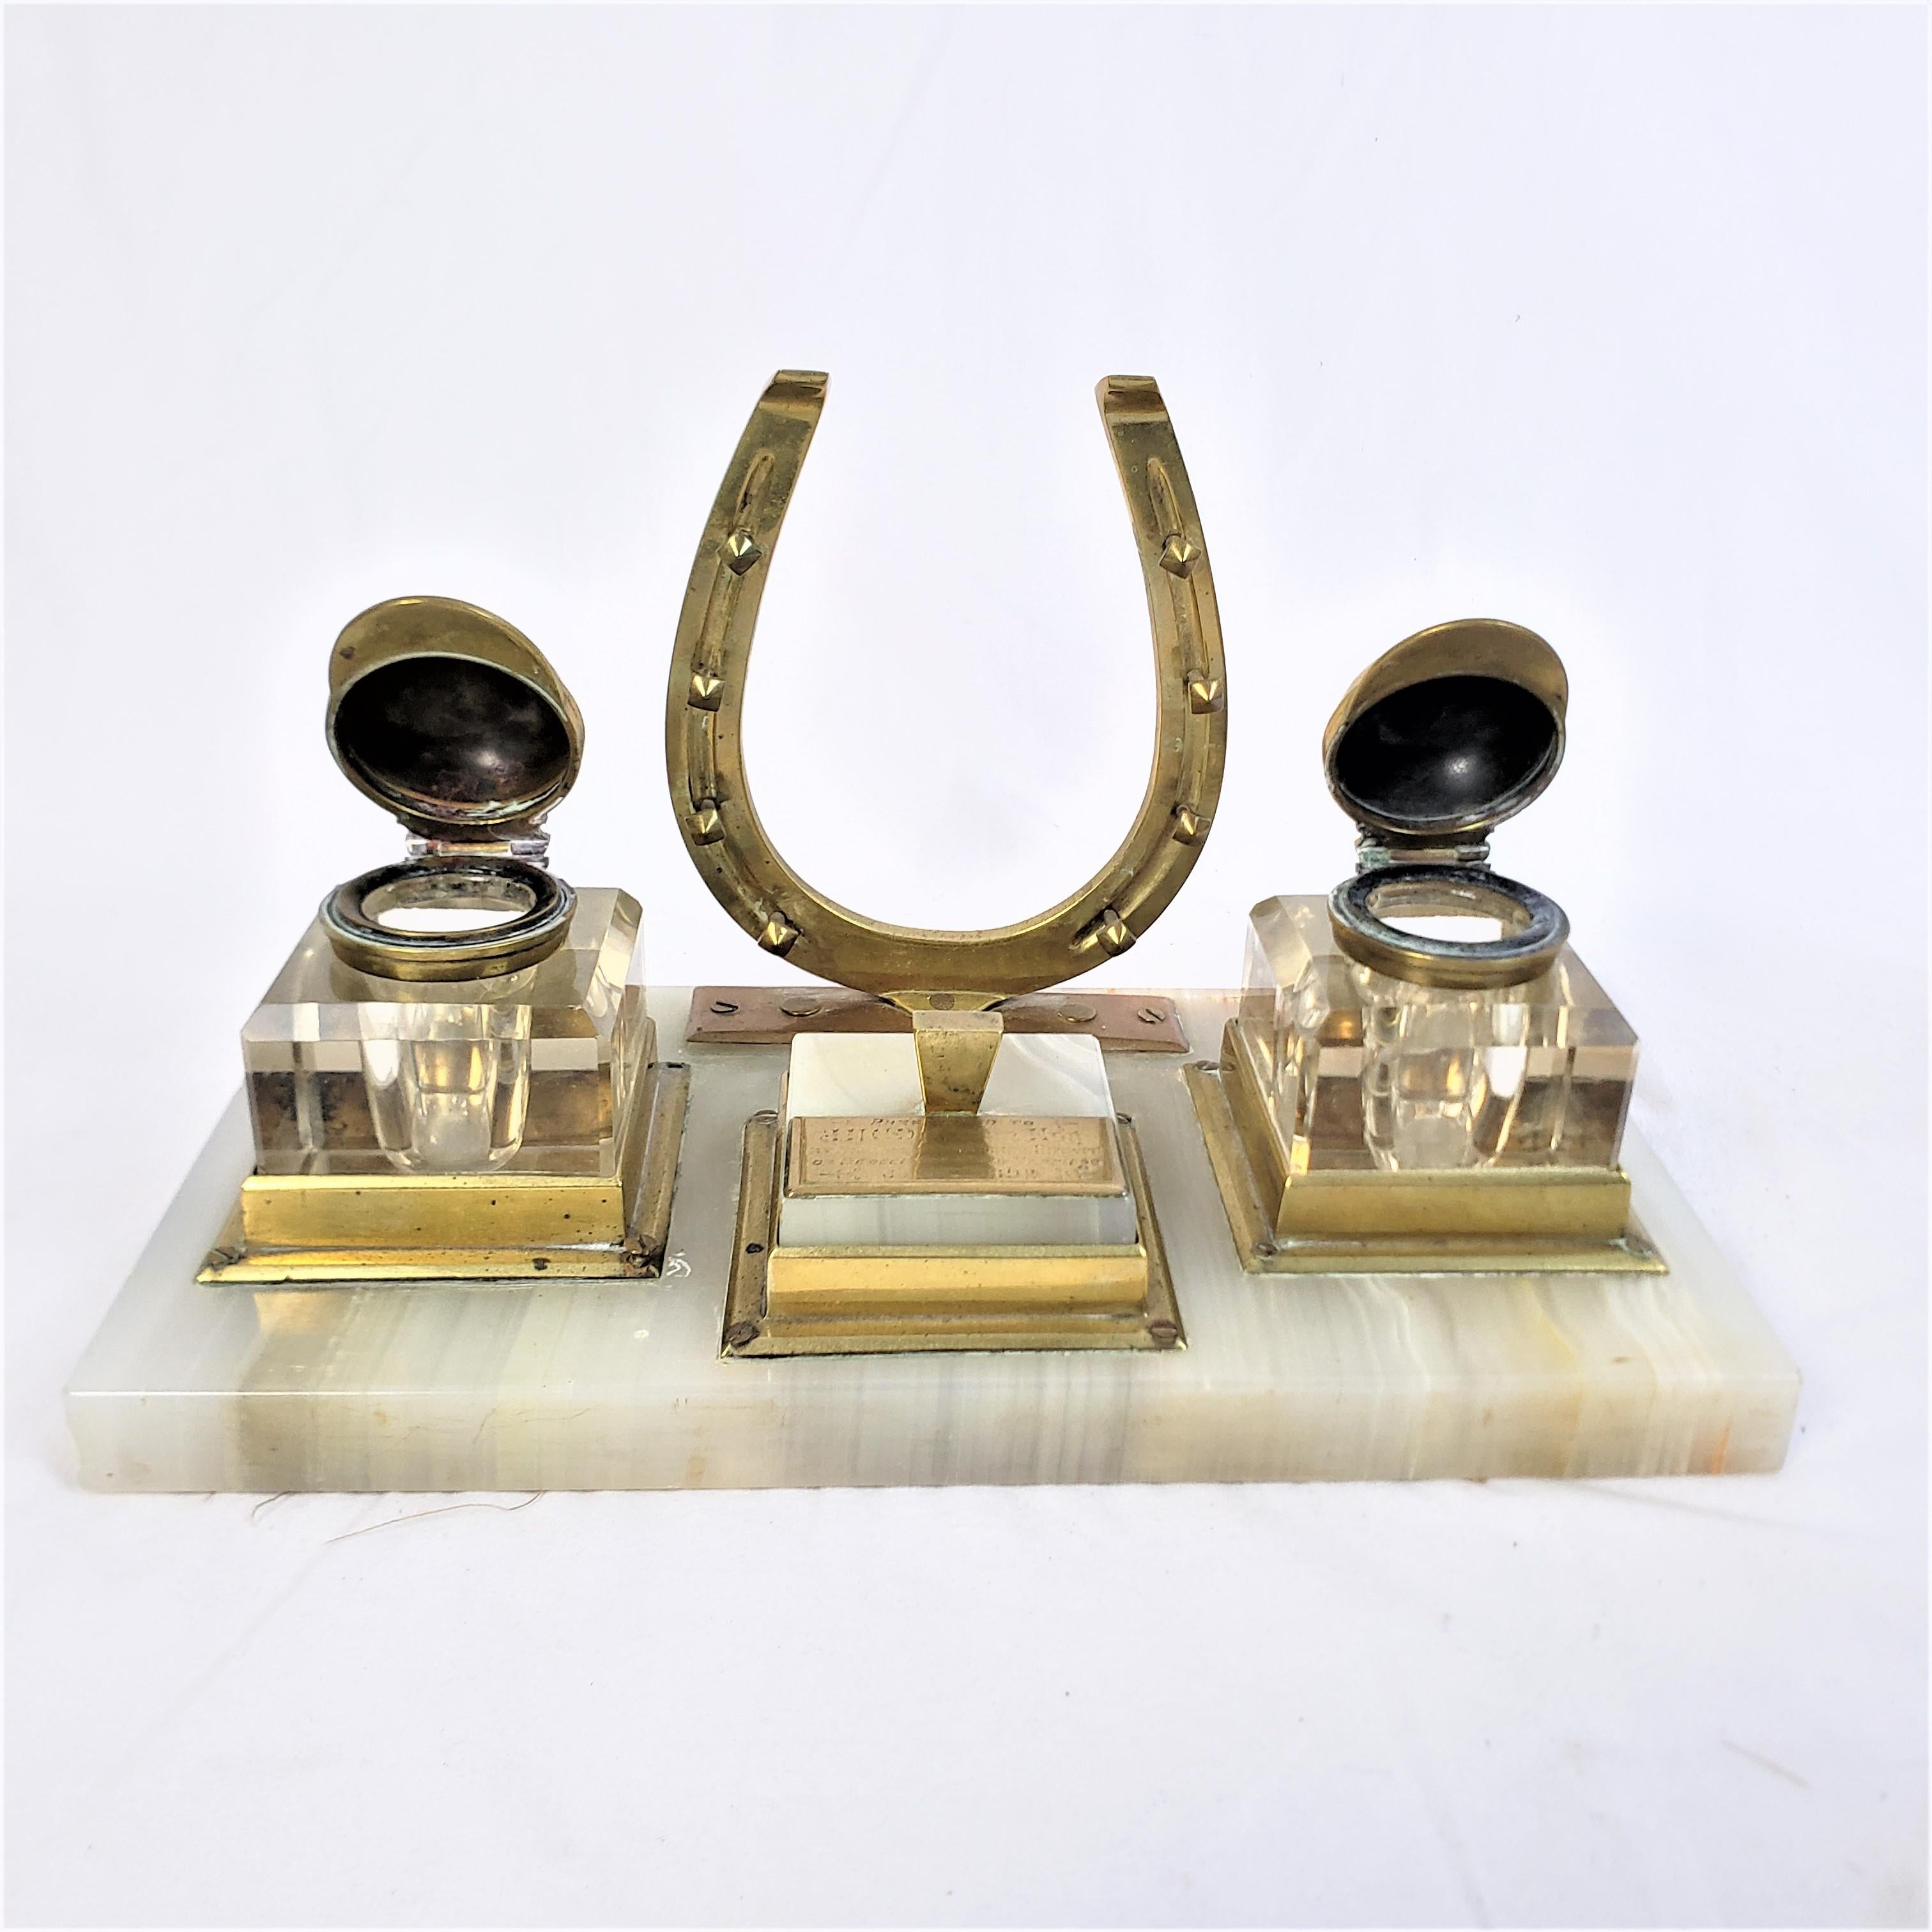 19th Century Antique English Presentation Inkwell & Desk Set with Horse Jockey Theme For Sale